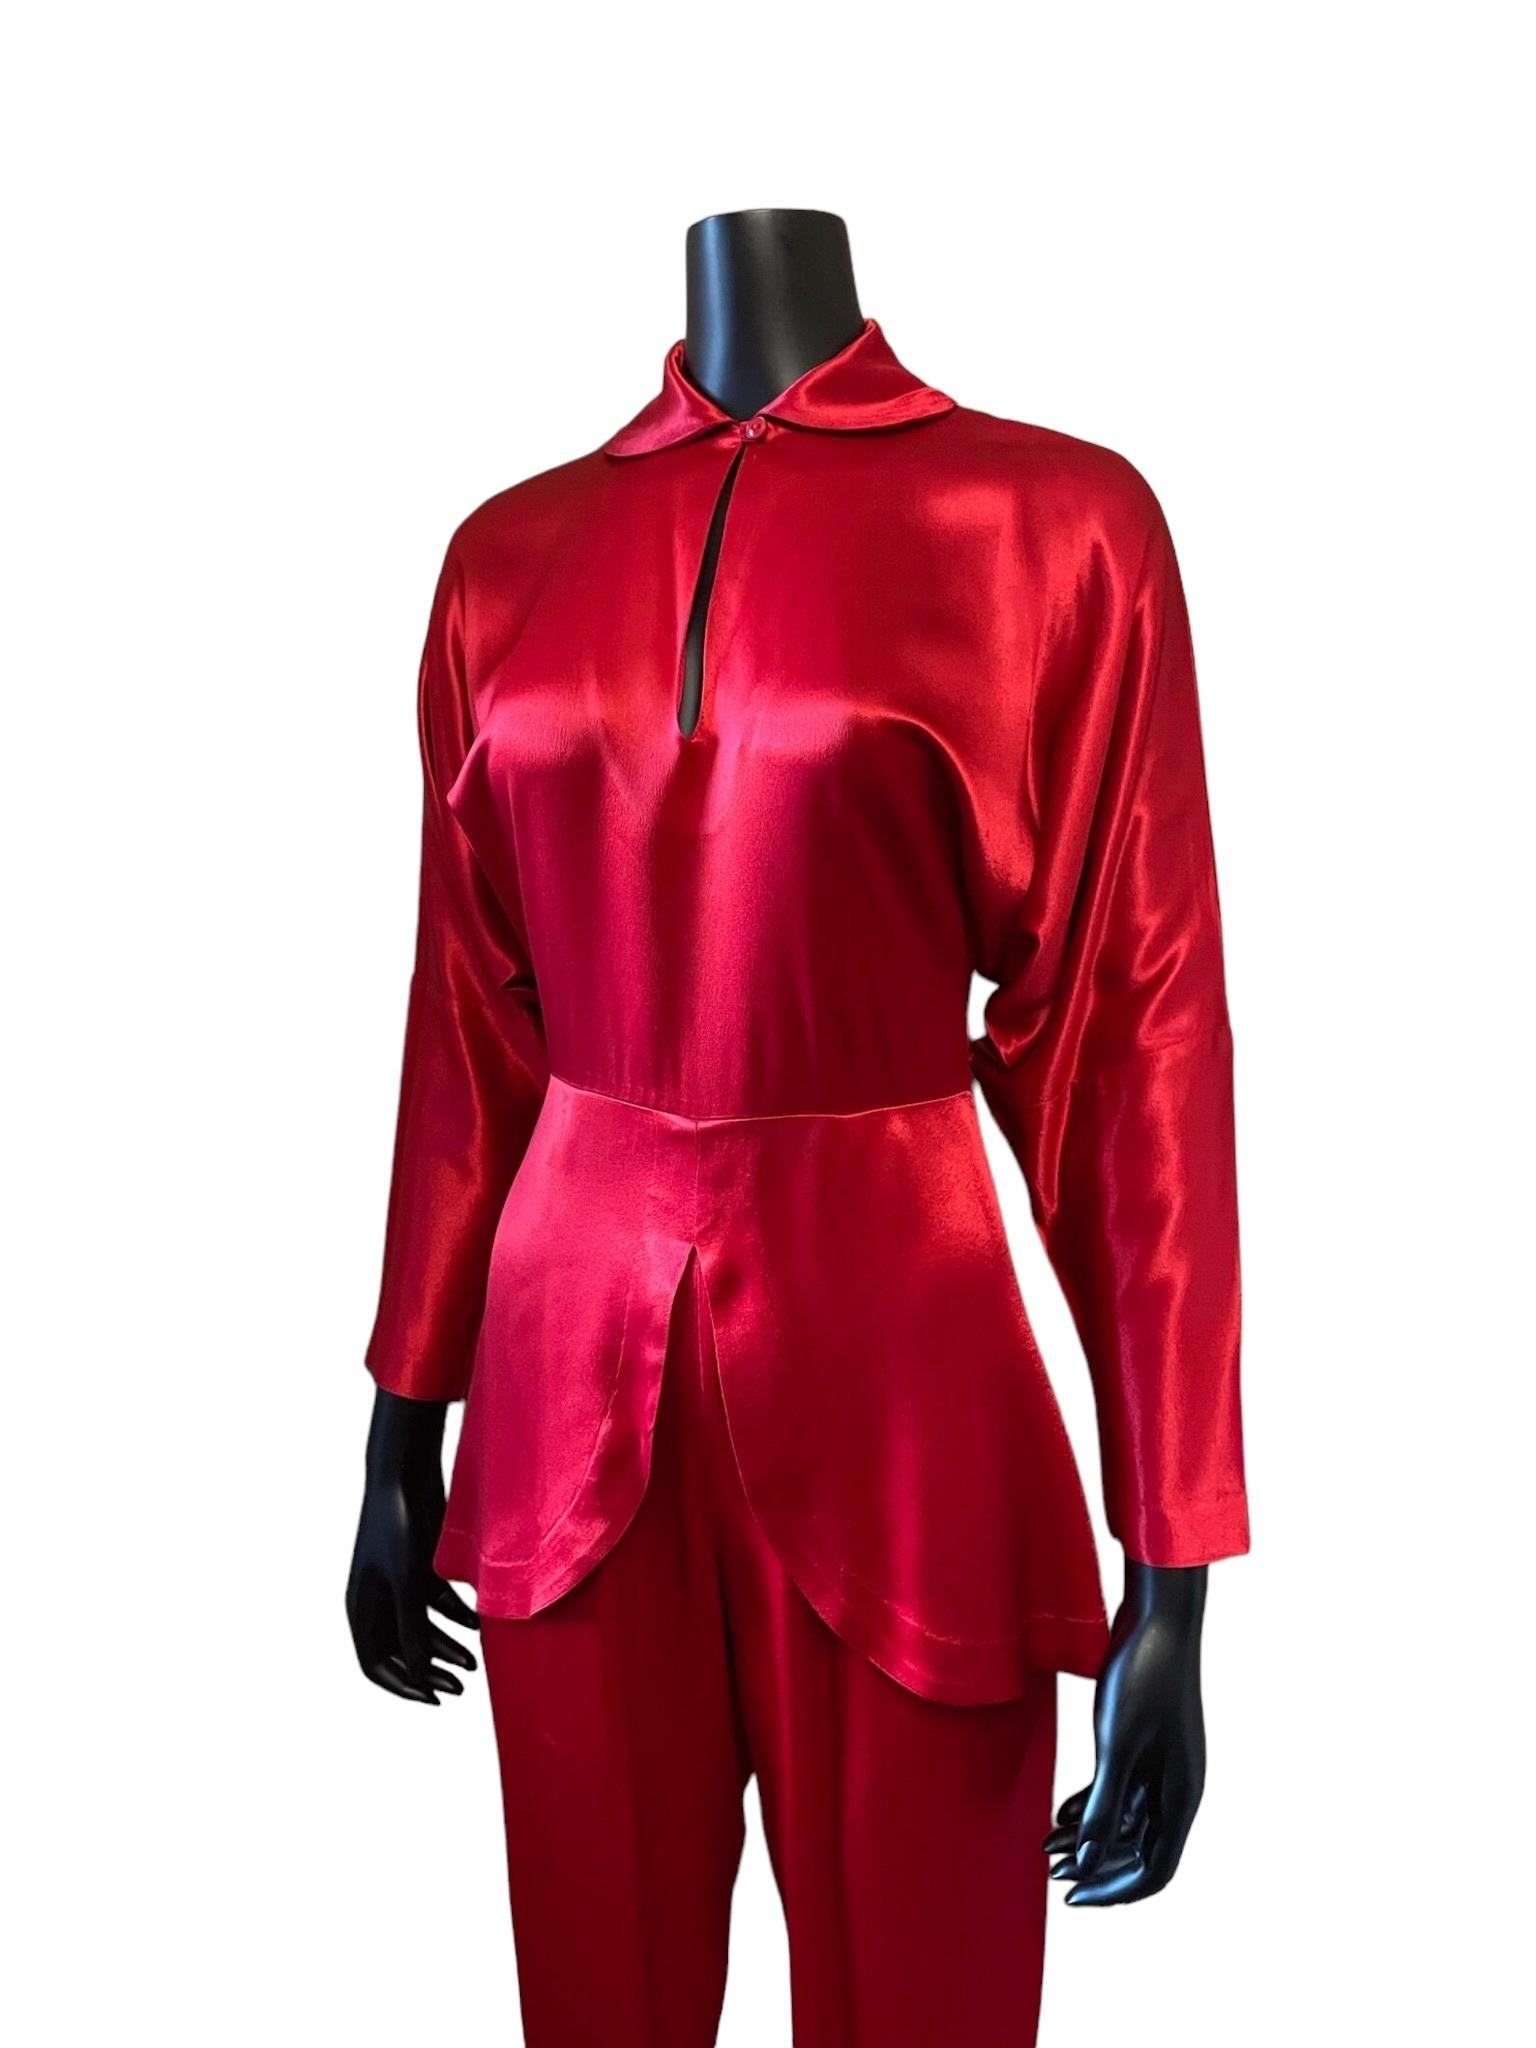 Women's Norma Kamali Lipstick Red Jumpsuit, Circa 1980s For Sale